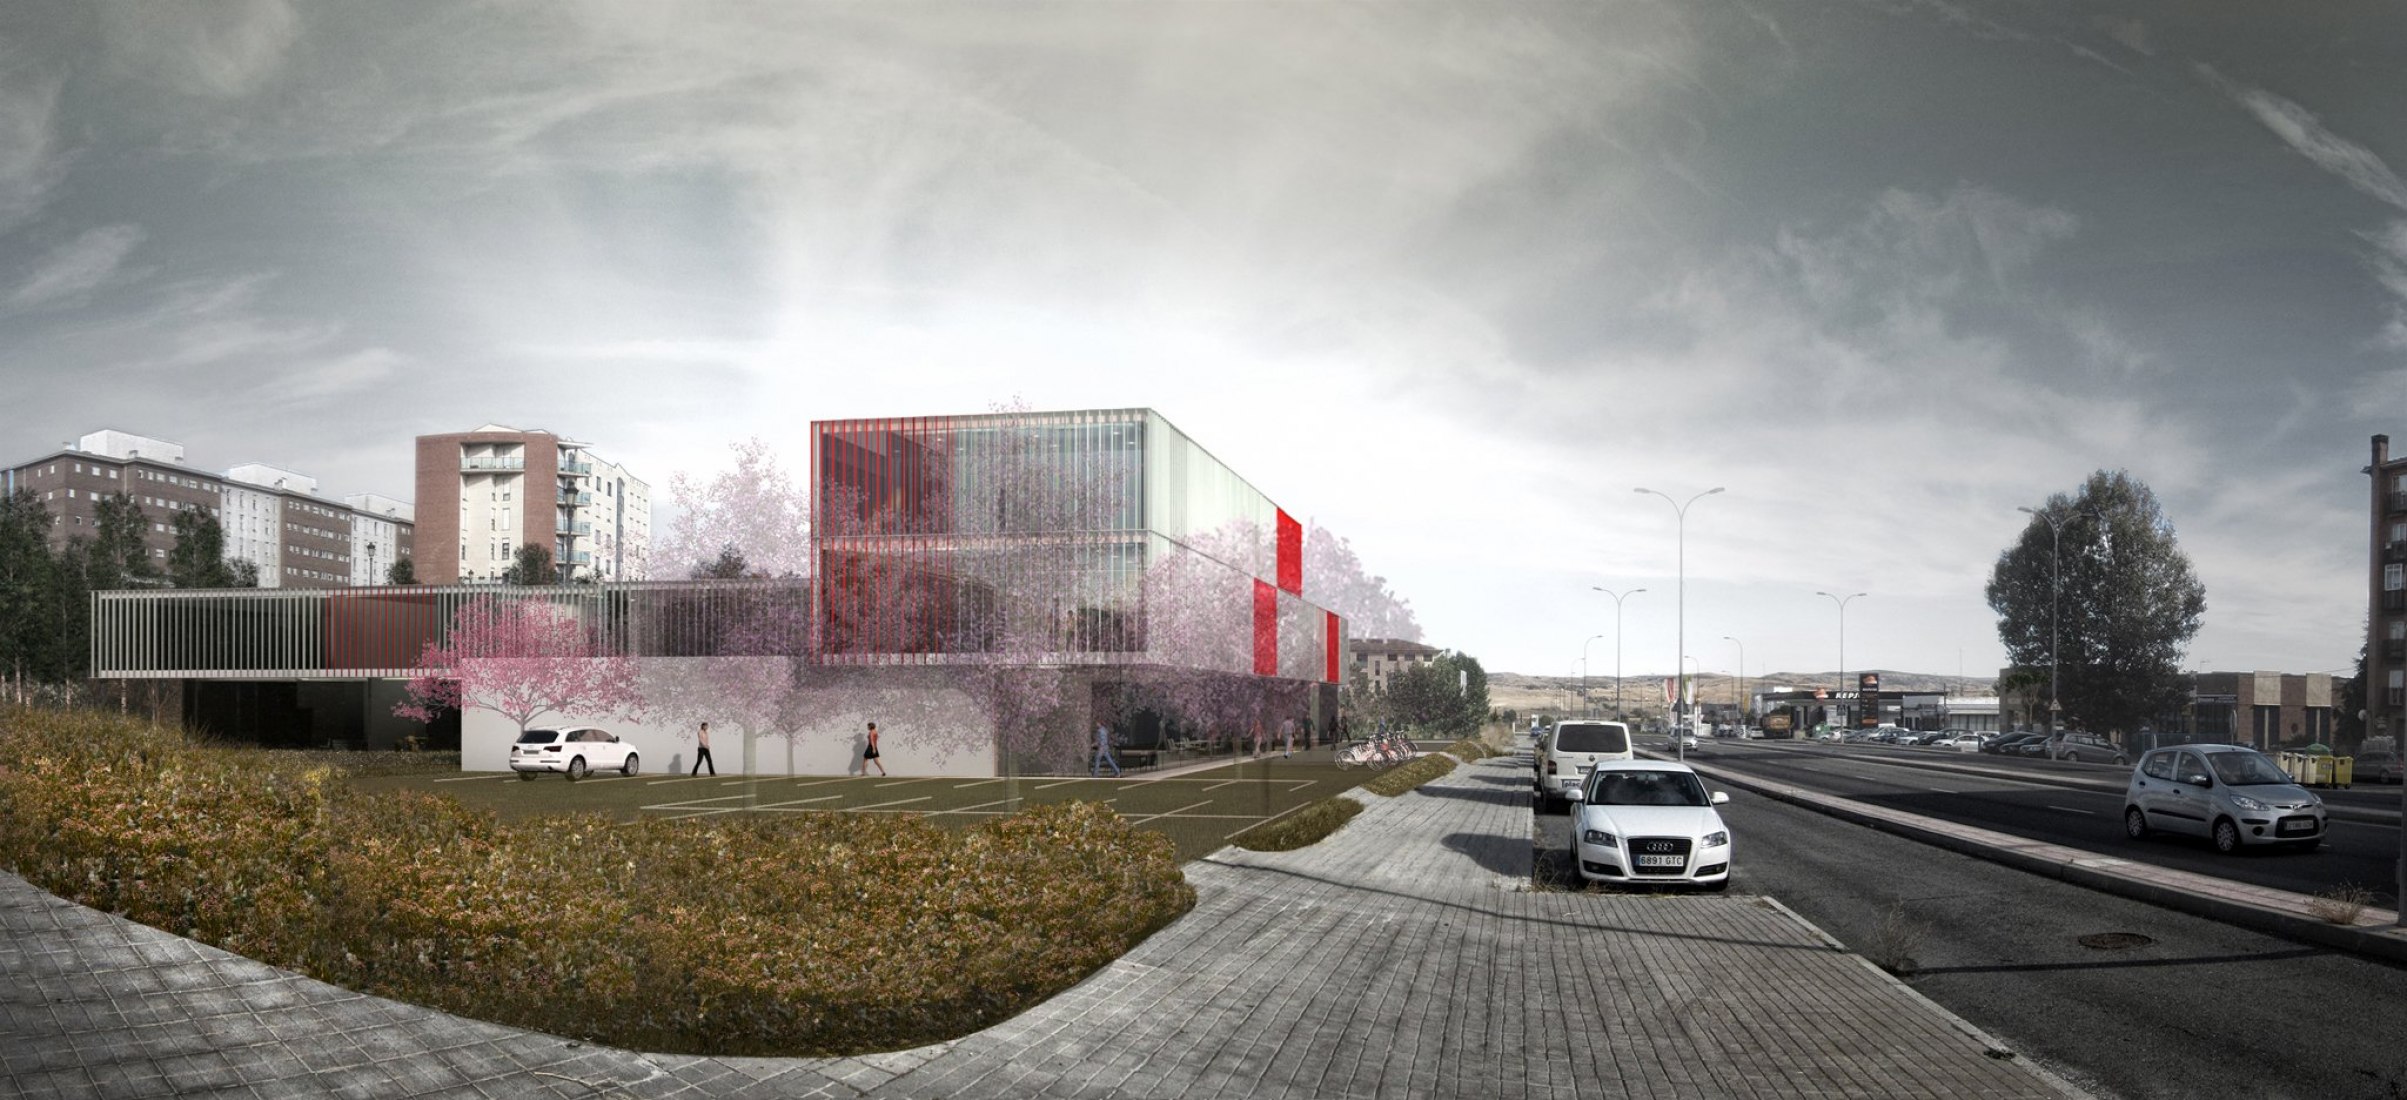 Outside view. New headquarters of the Spanish Red Cross in the city of Ávila by ABLM Arquitectos. Image Courtesy of ABLM Architects.